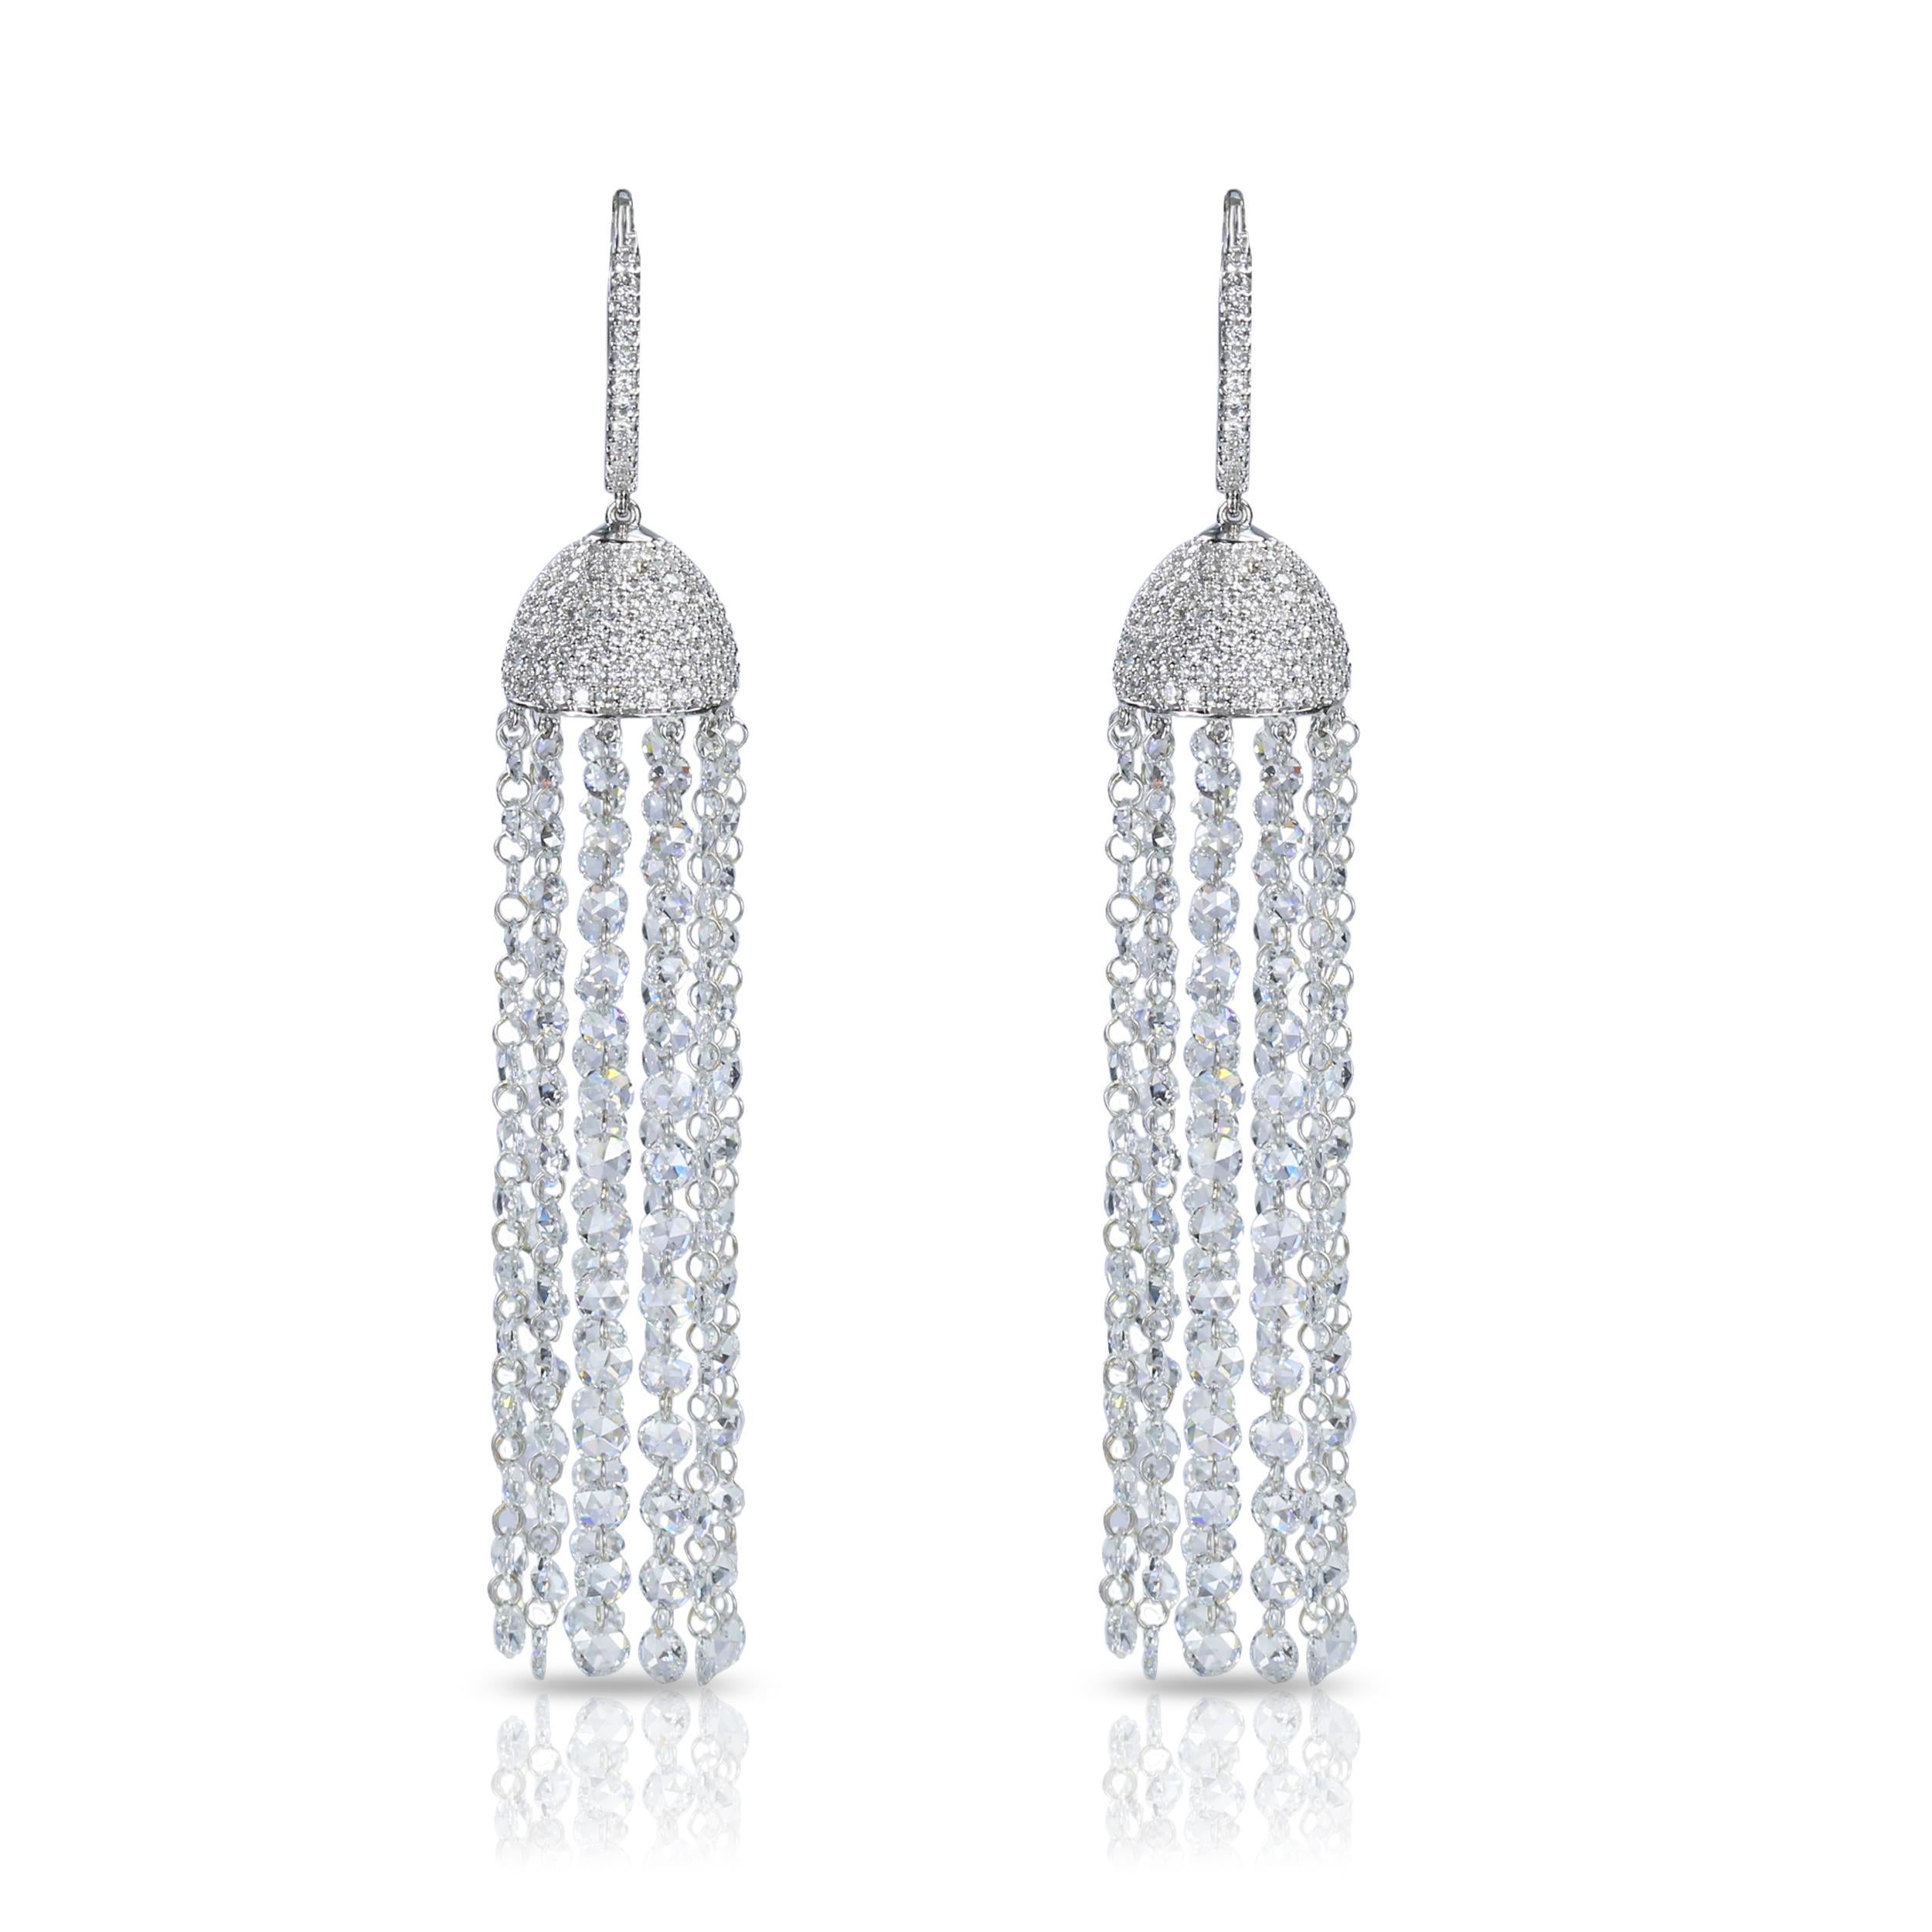 F-G-H/ VS-SI Brilliant cut and Rosecut Diamond Dangling Earrings

Indulge in the extravaganza that is this pair of 18K white gold danglers. The dome fashioned from brilliant cut diamonds complemented by a cascading waterfall of delicate rosecut